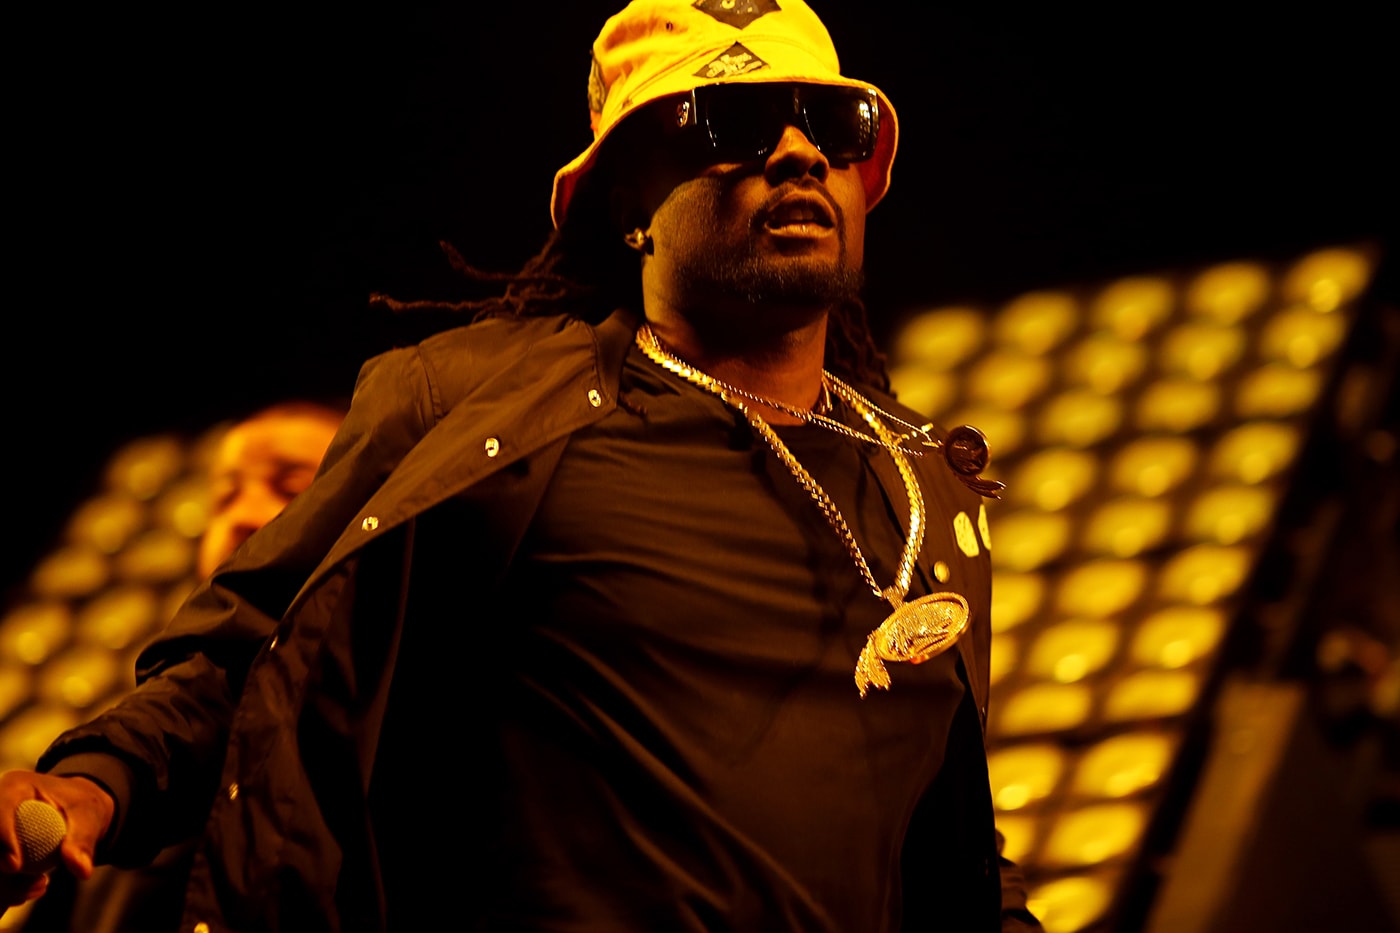 13th-witness-x-wale-day-in-the-life